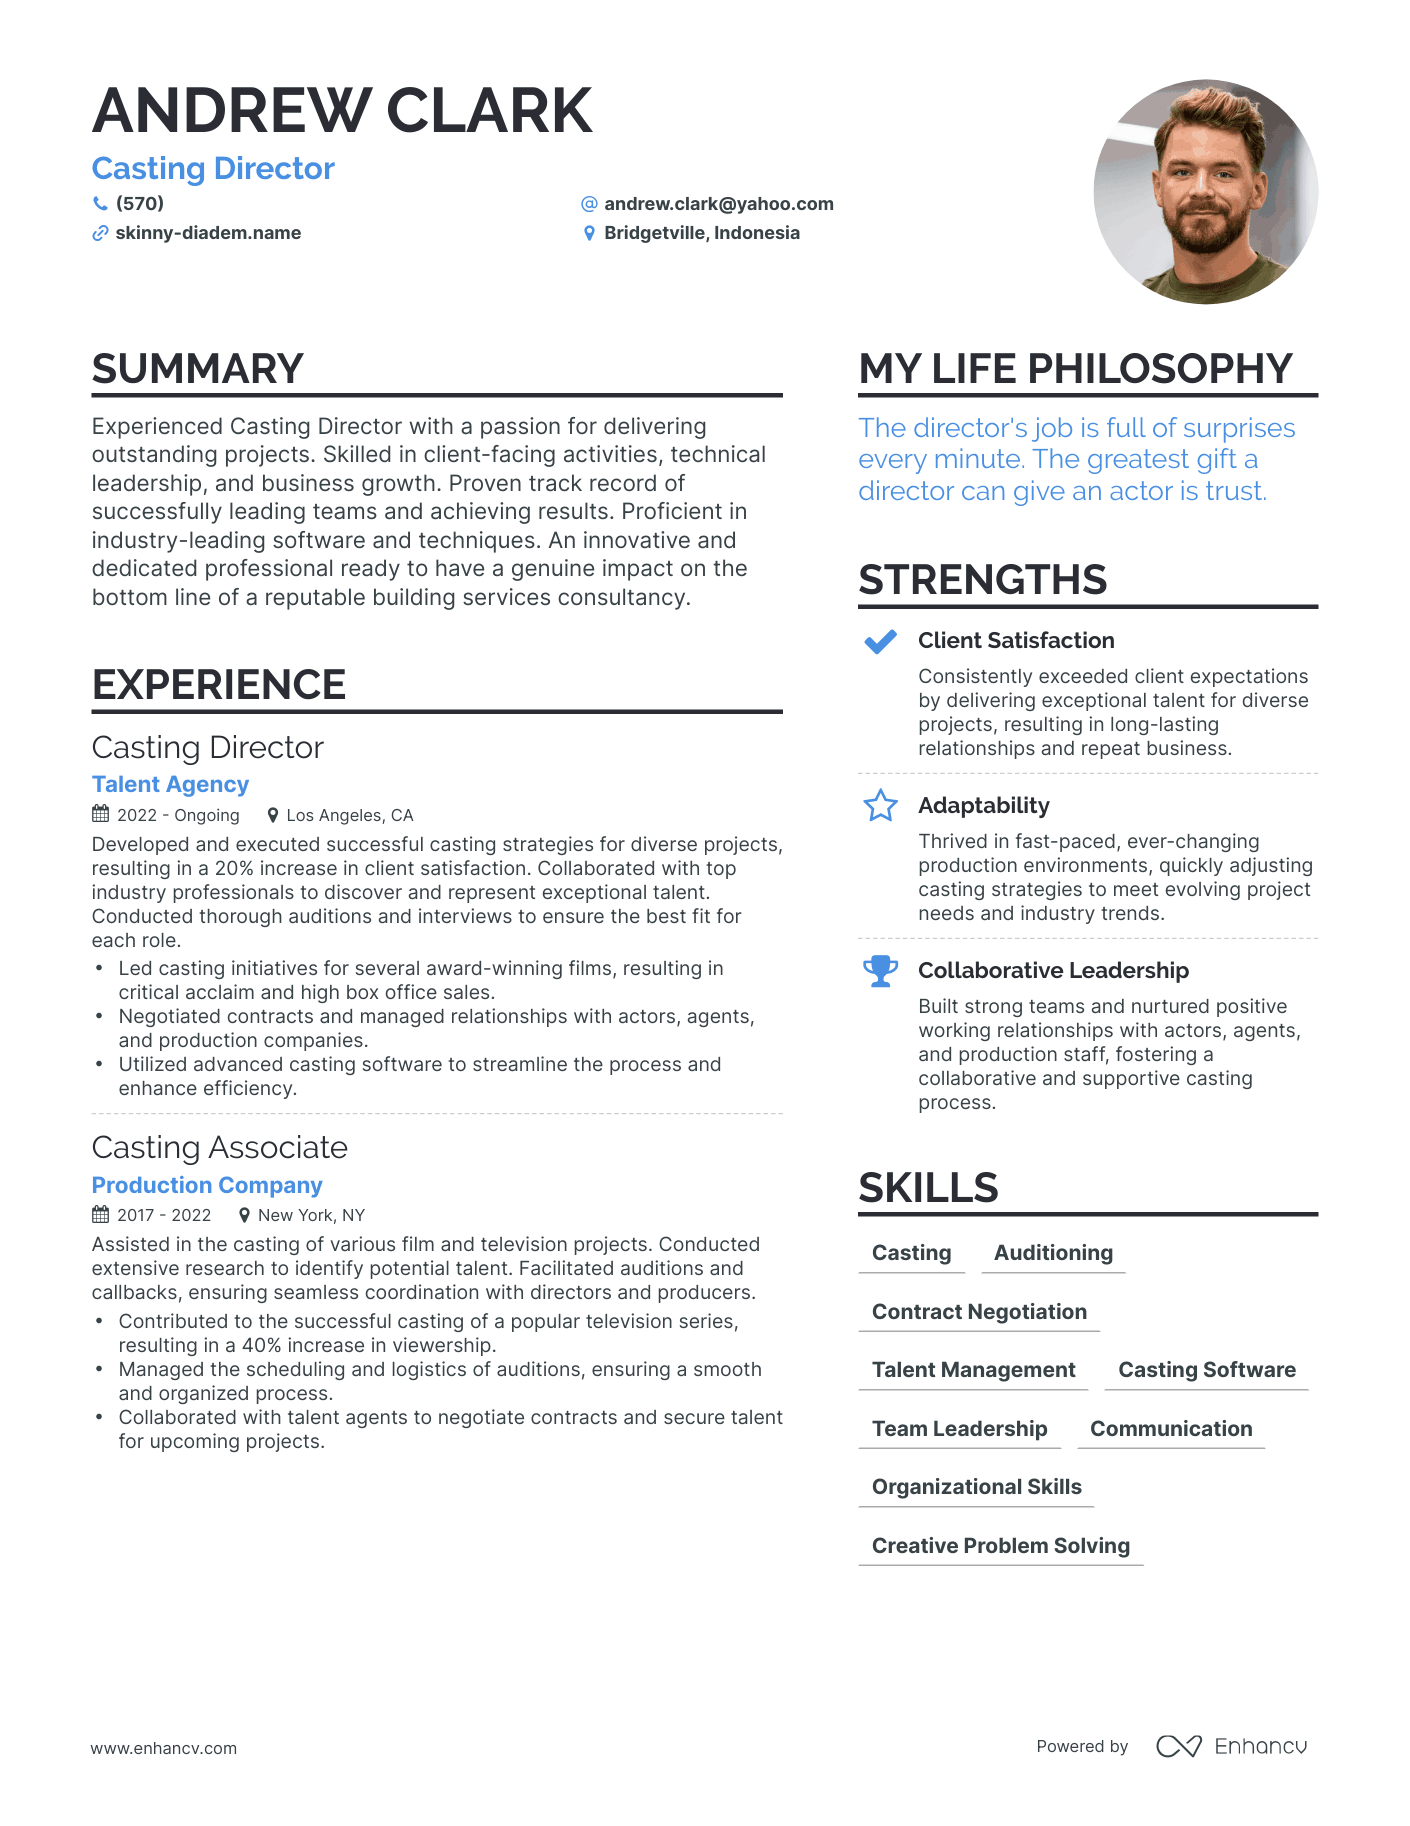 Casting Director resume example